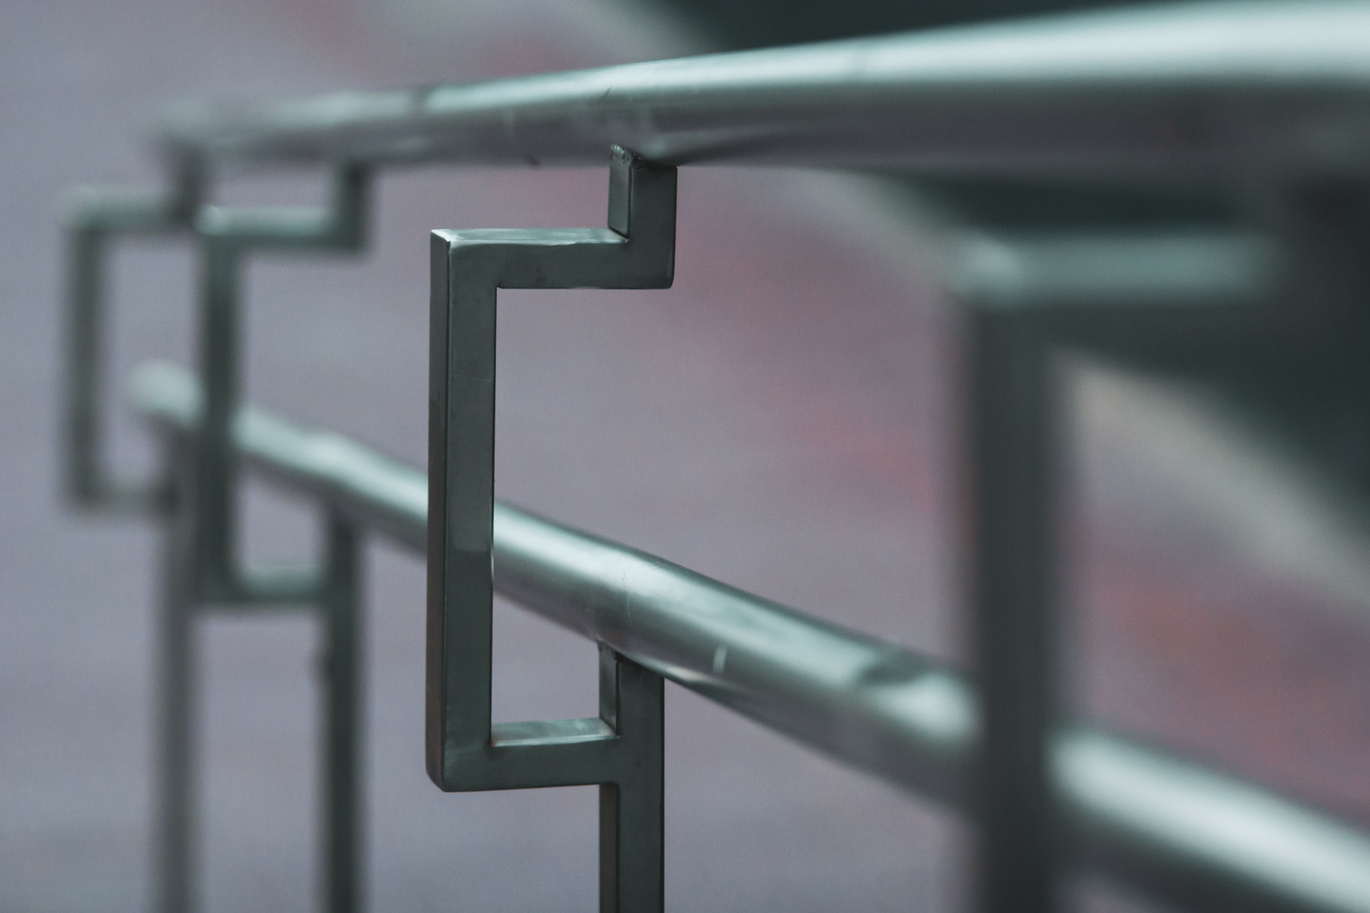 Stainless steel handrails on the street receding into the distance with selective focus.